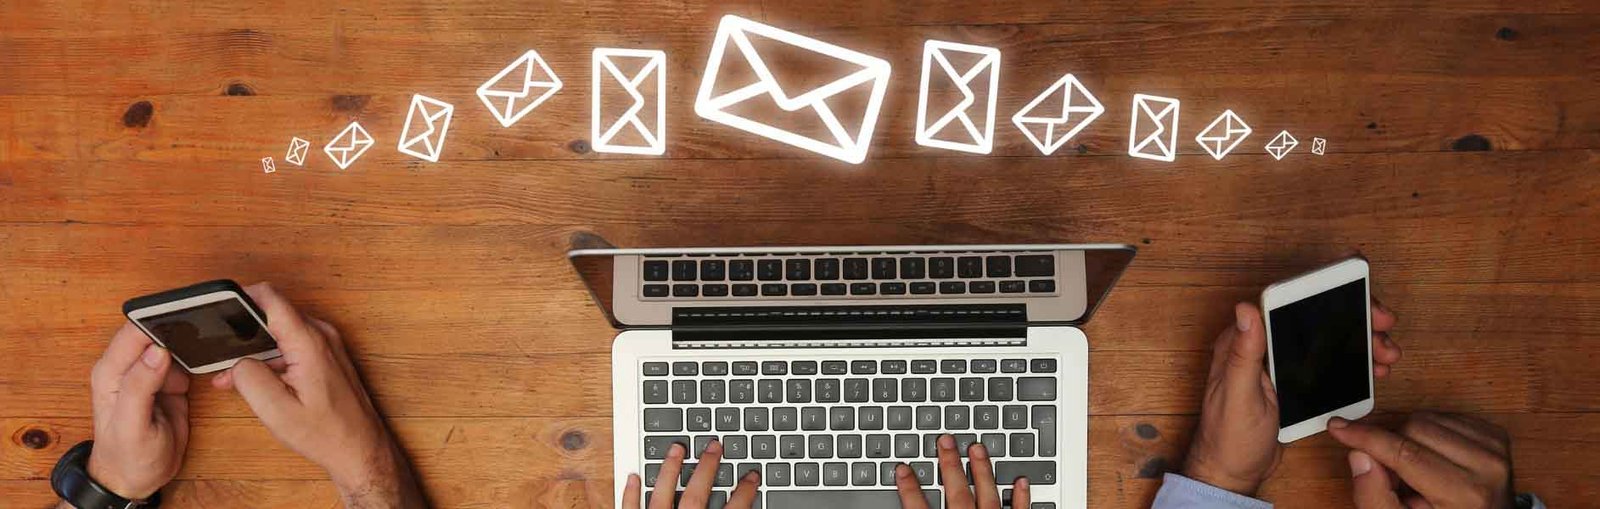 How to Avoid Unwanted Email Without Filtering Important Messages